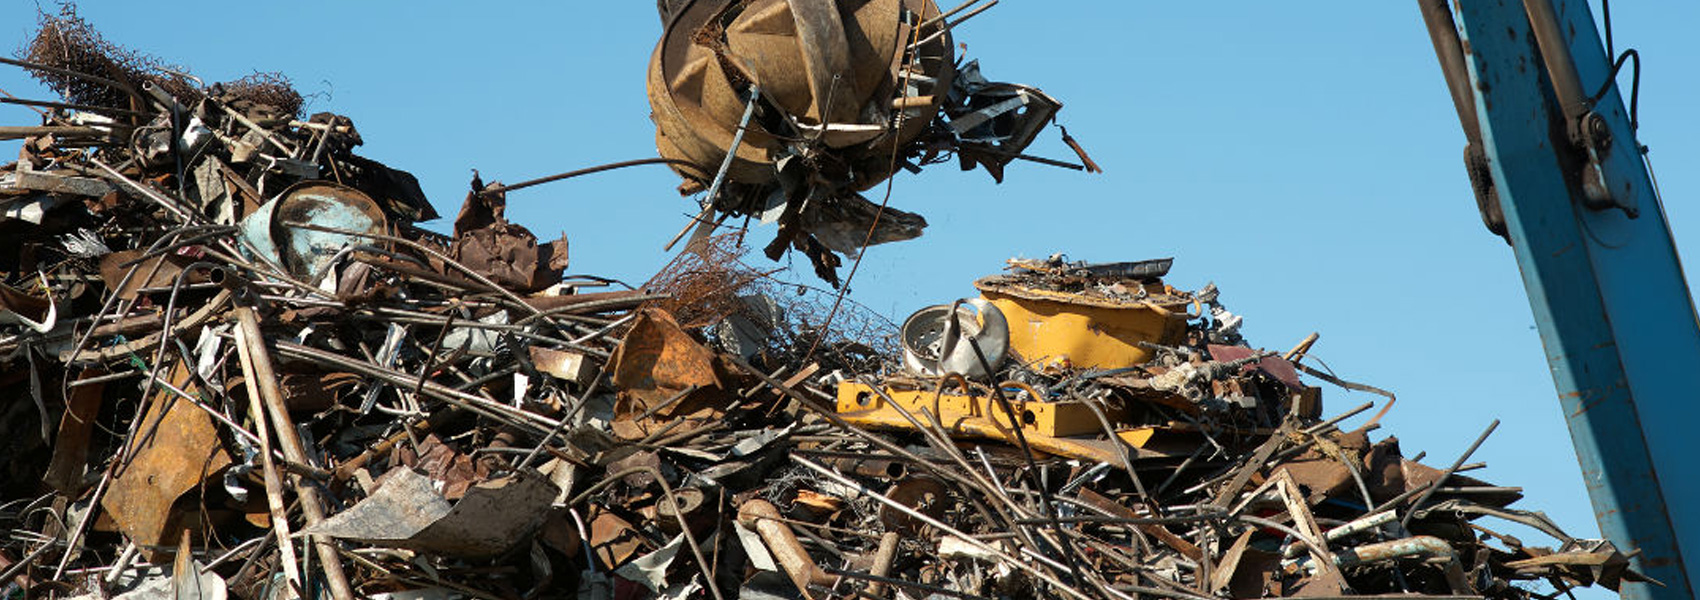 Scrap Iron Recycling Tips To Help You Earn More